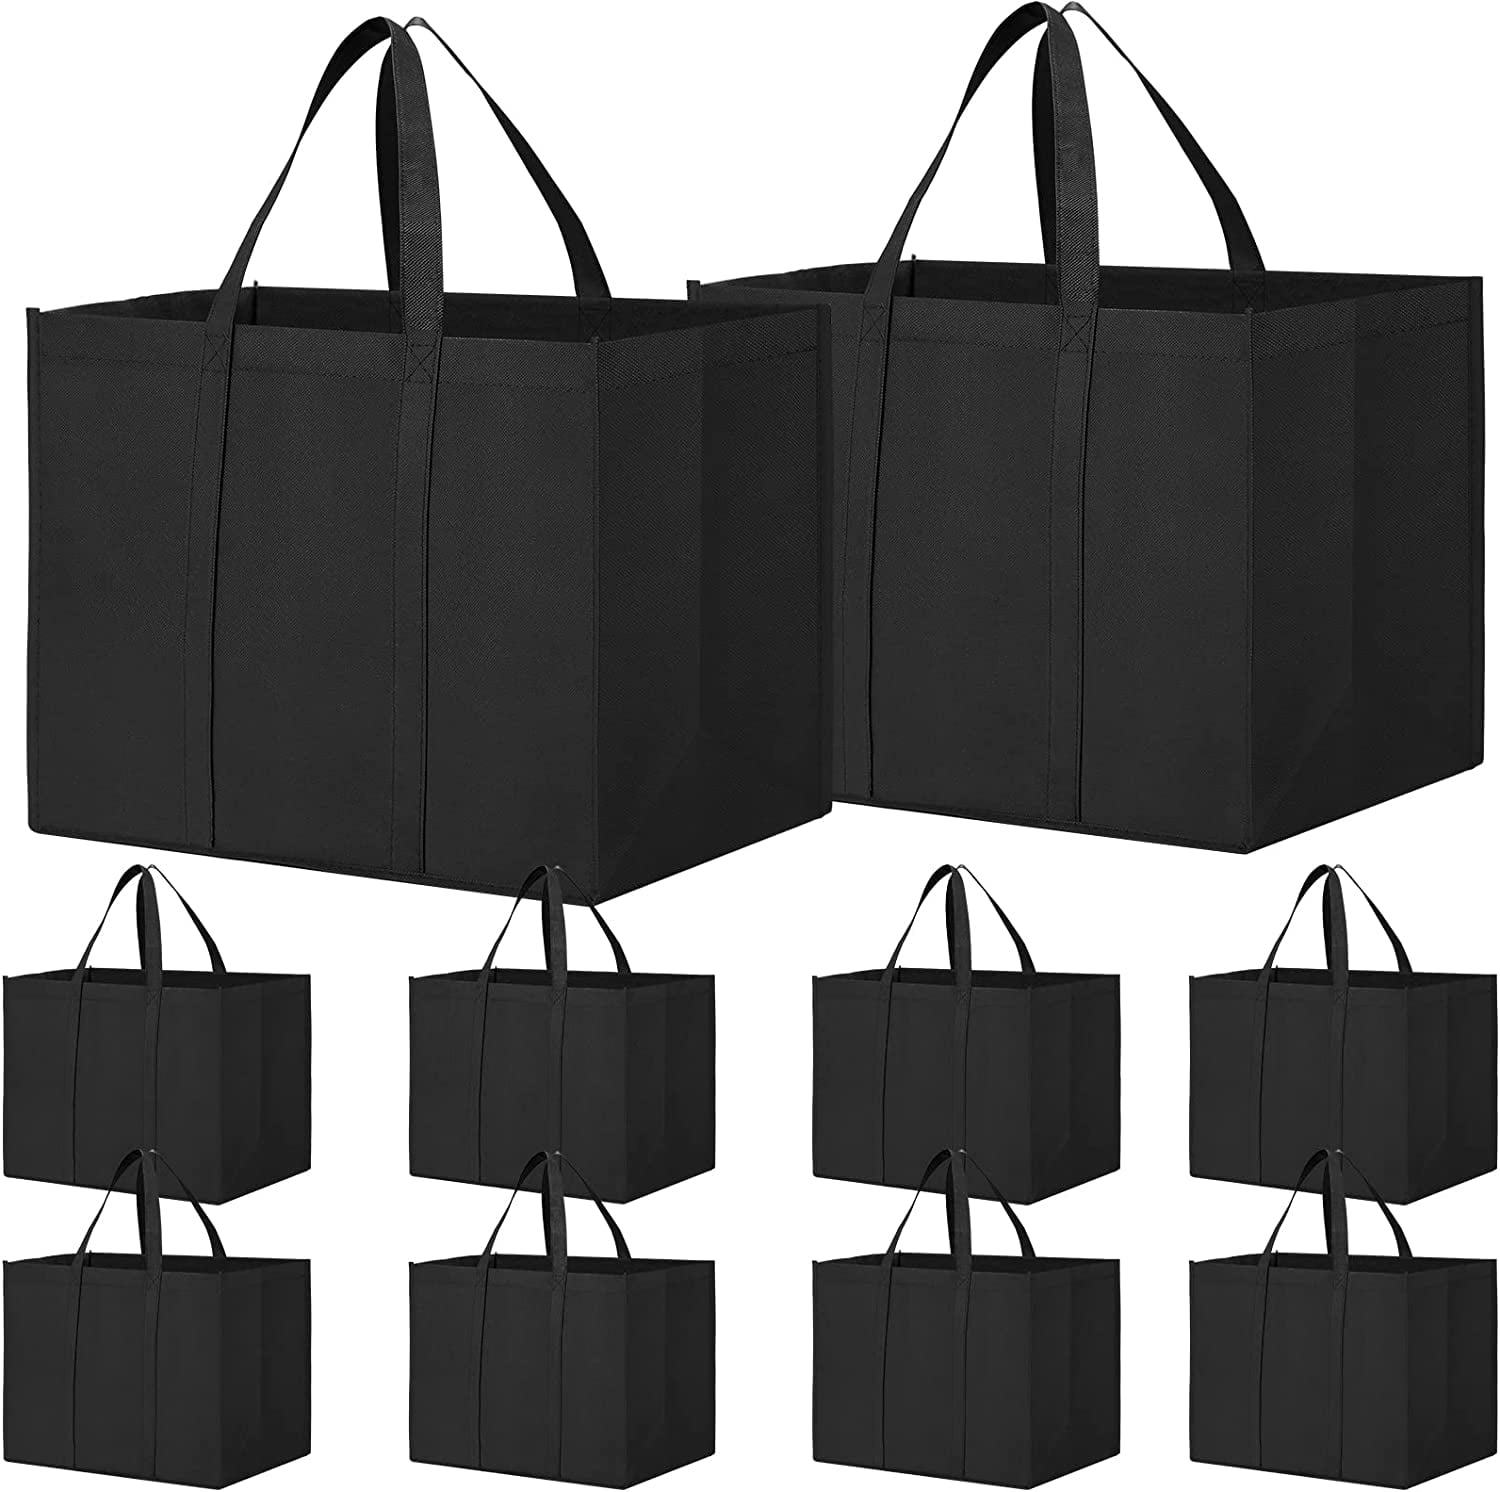 GOWINSEE 12 Pack Reusable Grocery Shopping Bags, Large Foldable Shopping Bags Tote Bags, Produce Bag with Reinforced Han - image 1 of 6